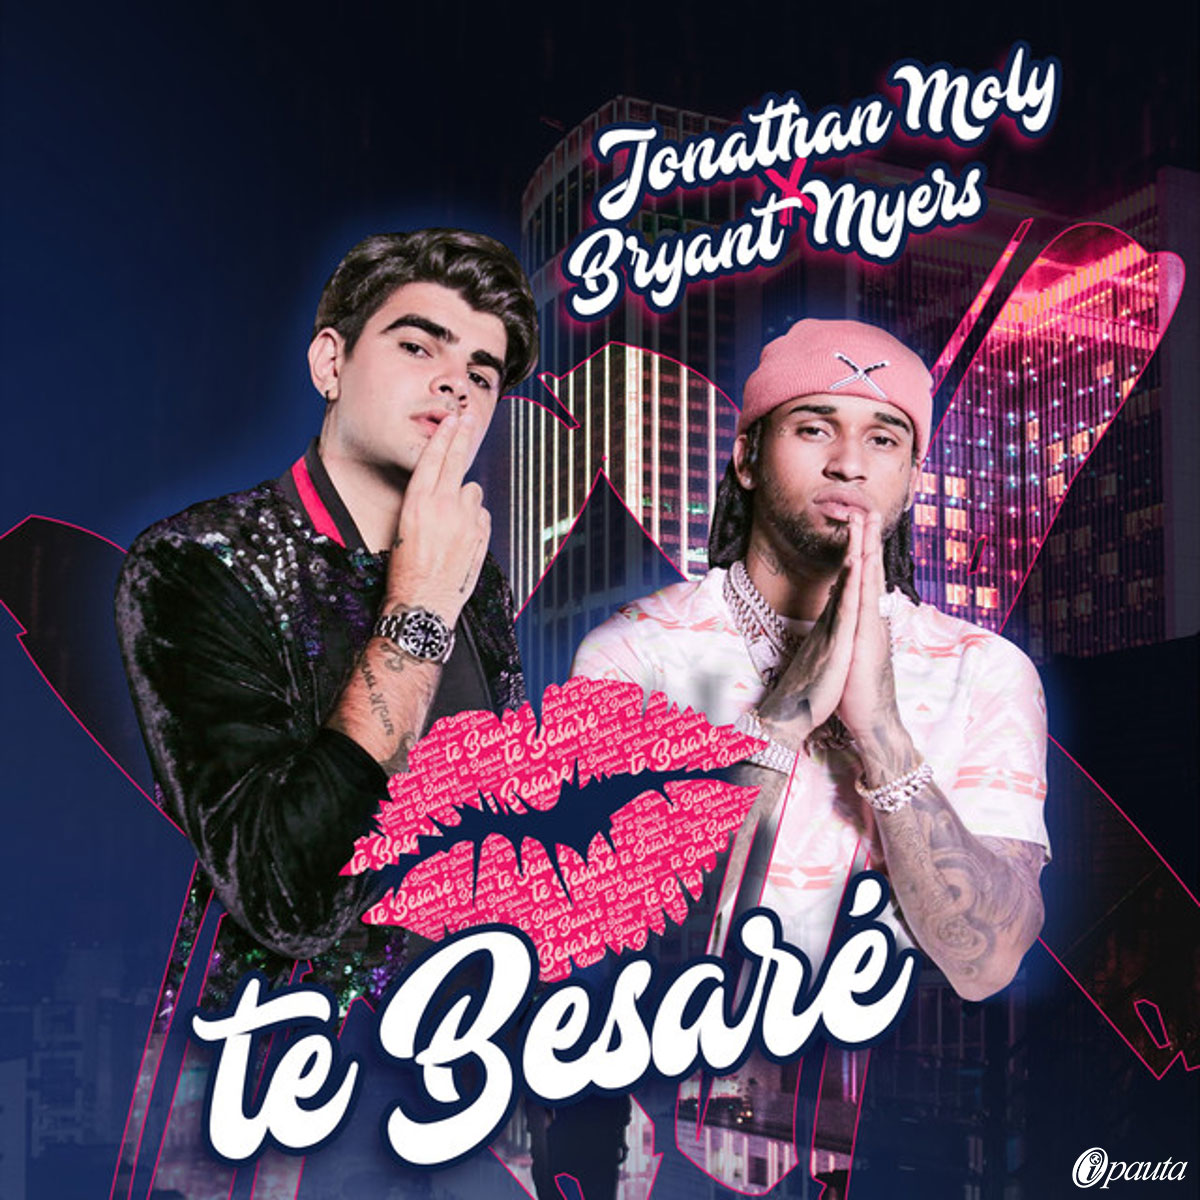 Jonathan Moly Ft. Bryant Myers - Te Besare